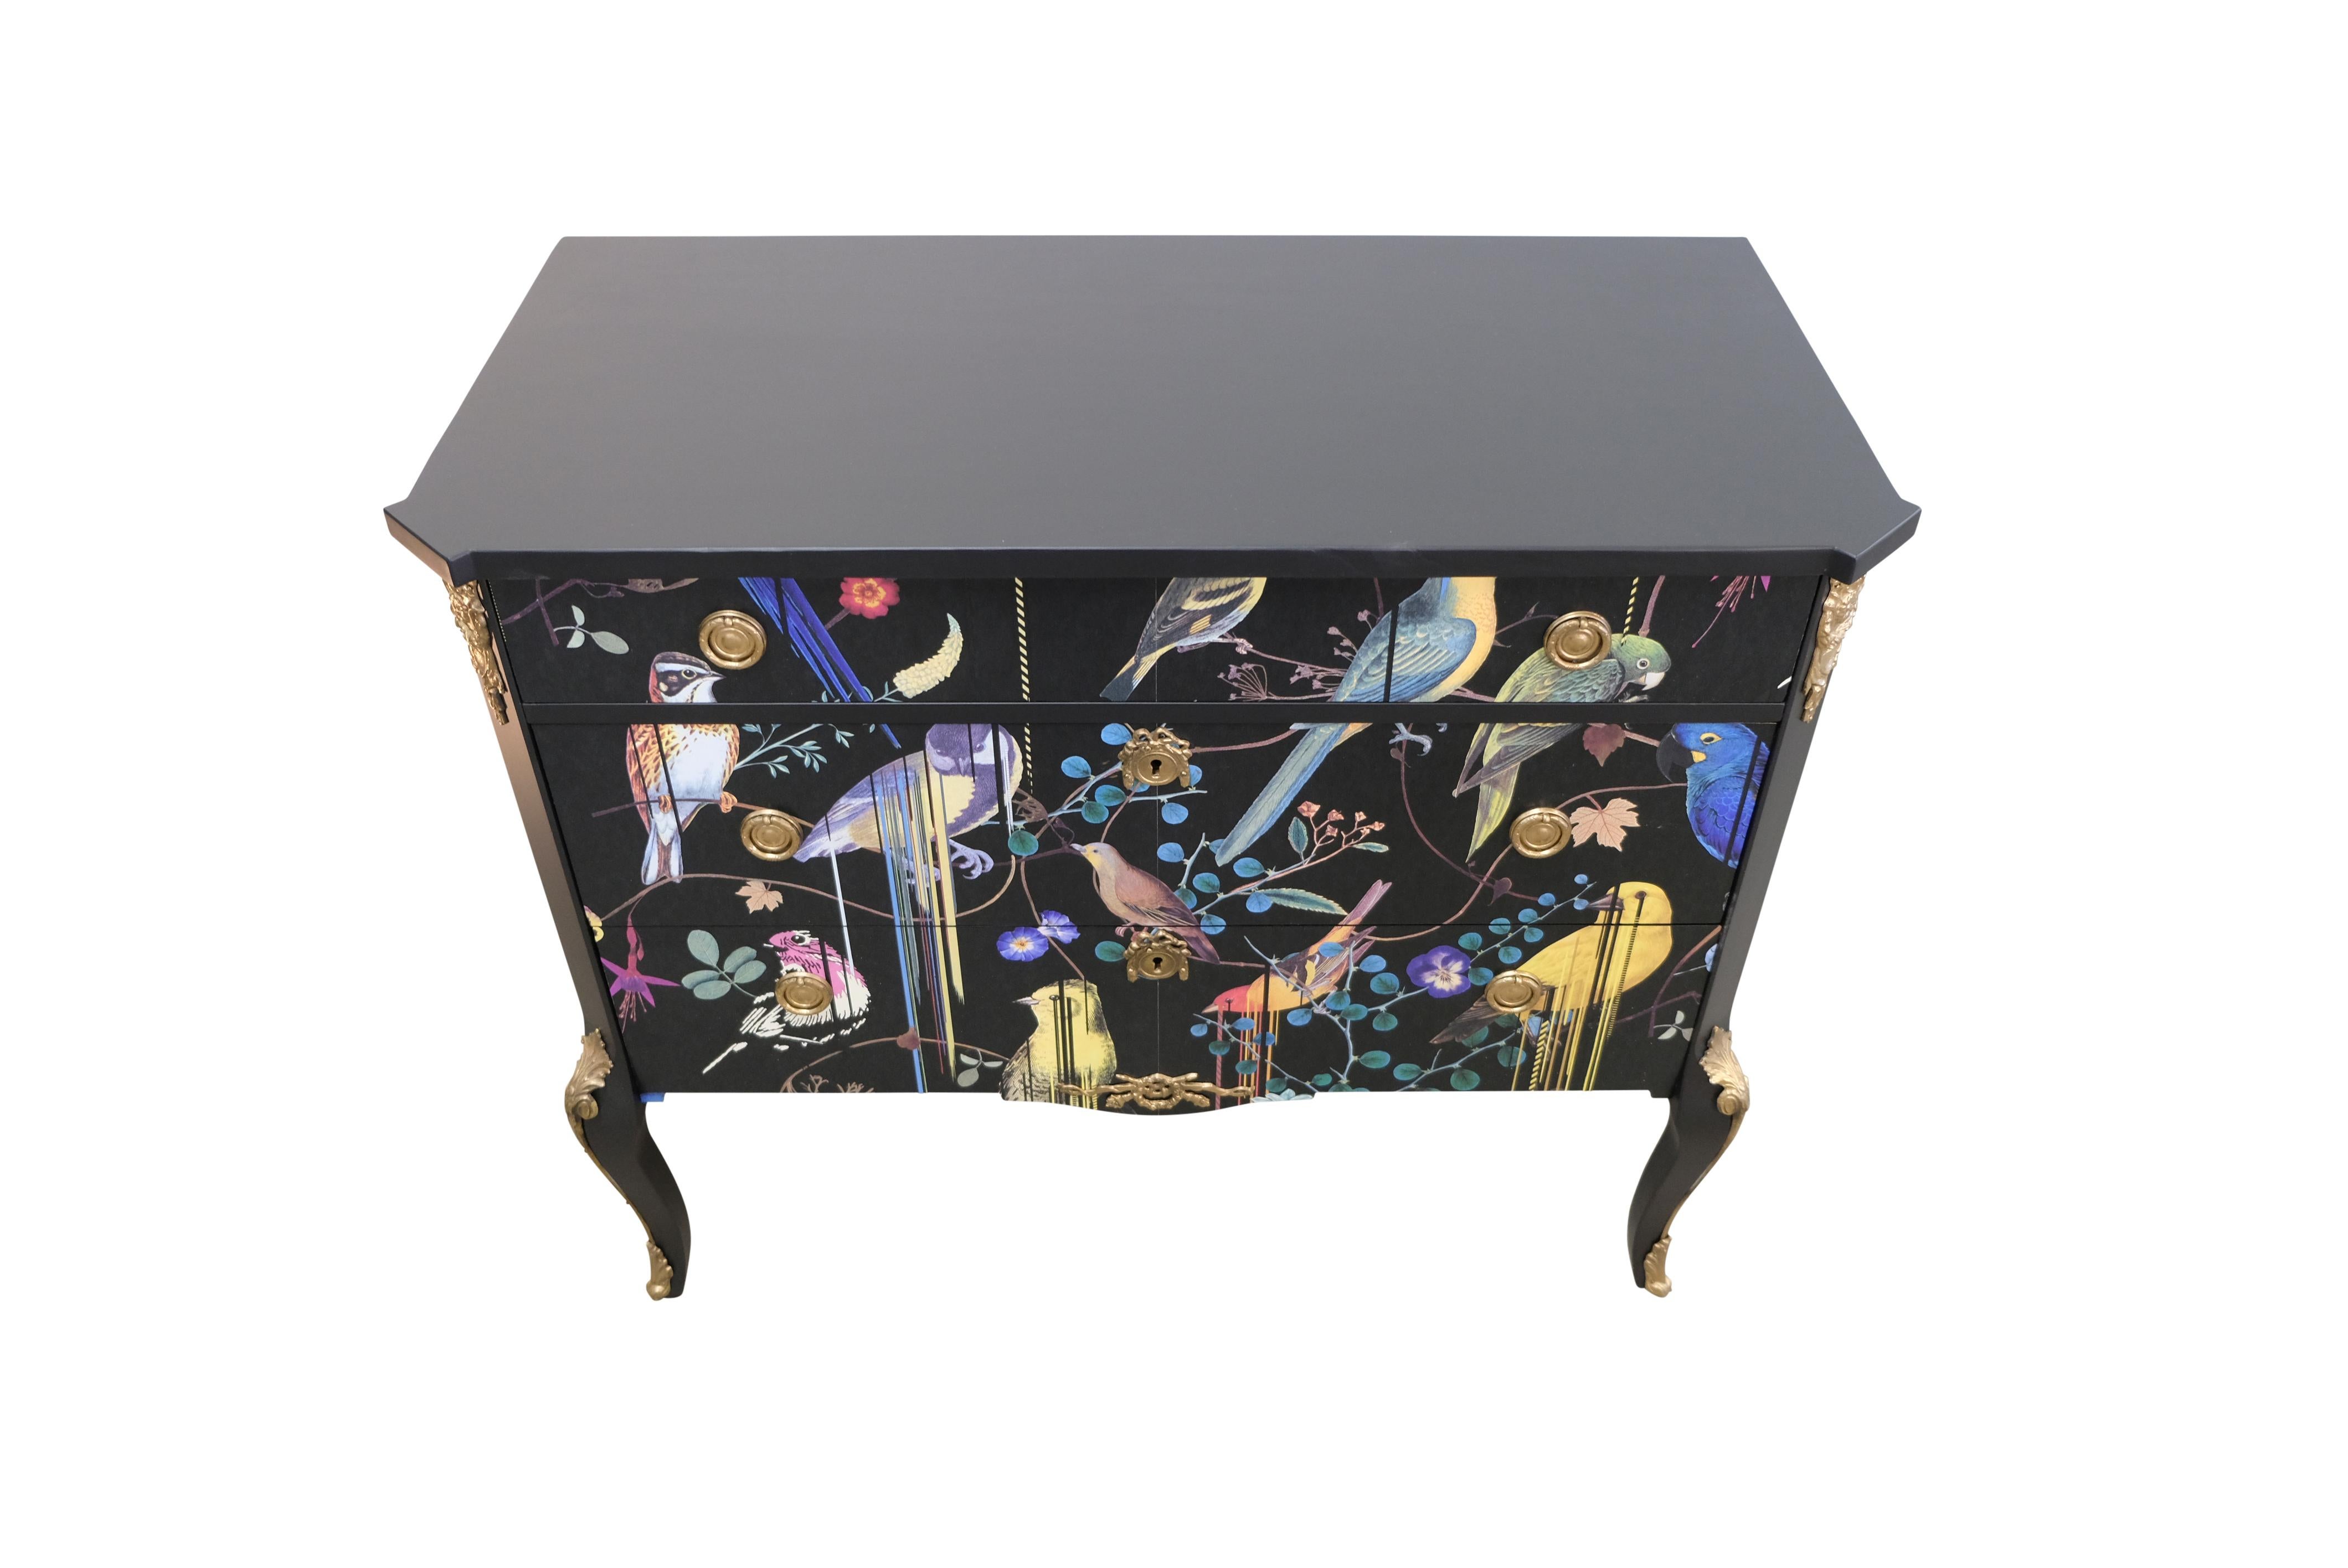 European Classic Rococo  Style Chests with Christian Lacroix Design